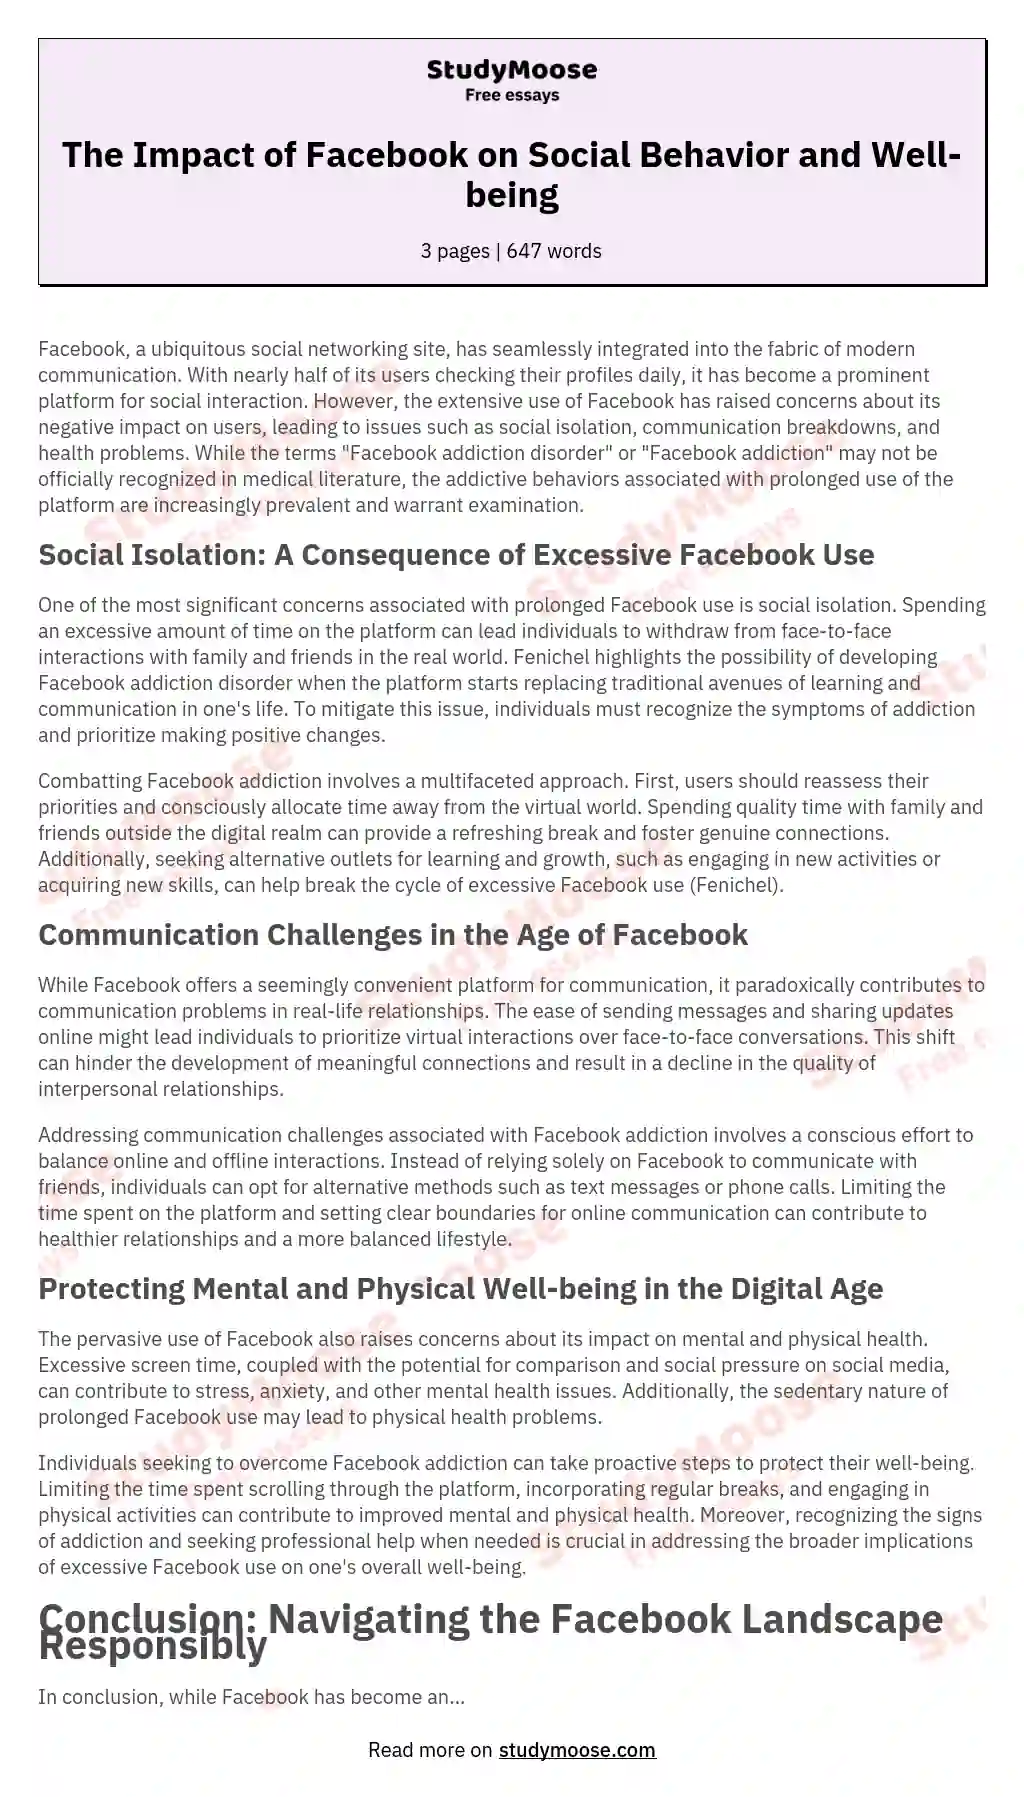 The Impact of Facebook on Social Behavior and Well-being essay